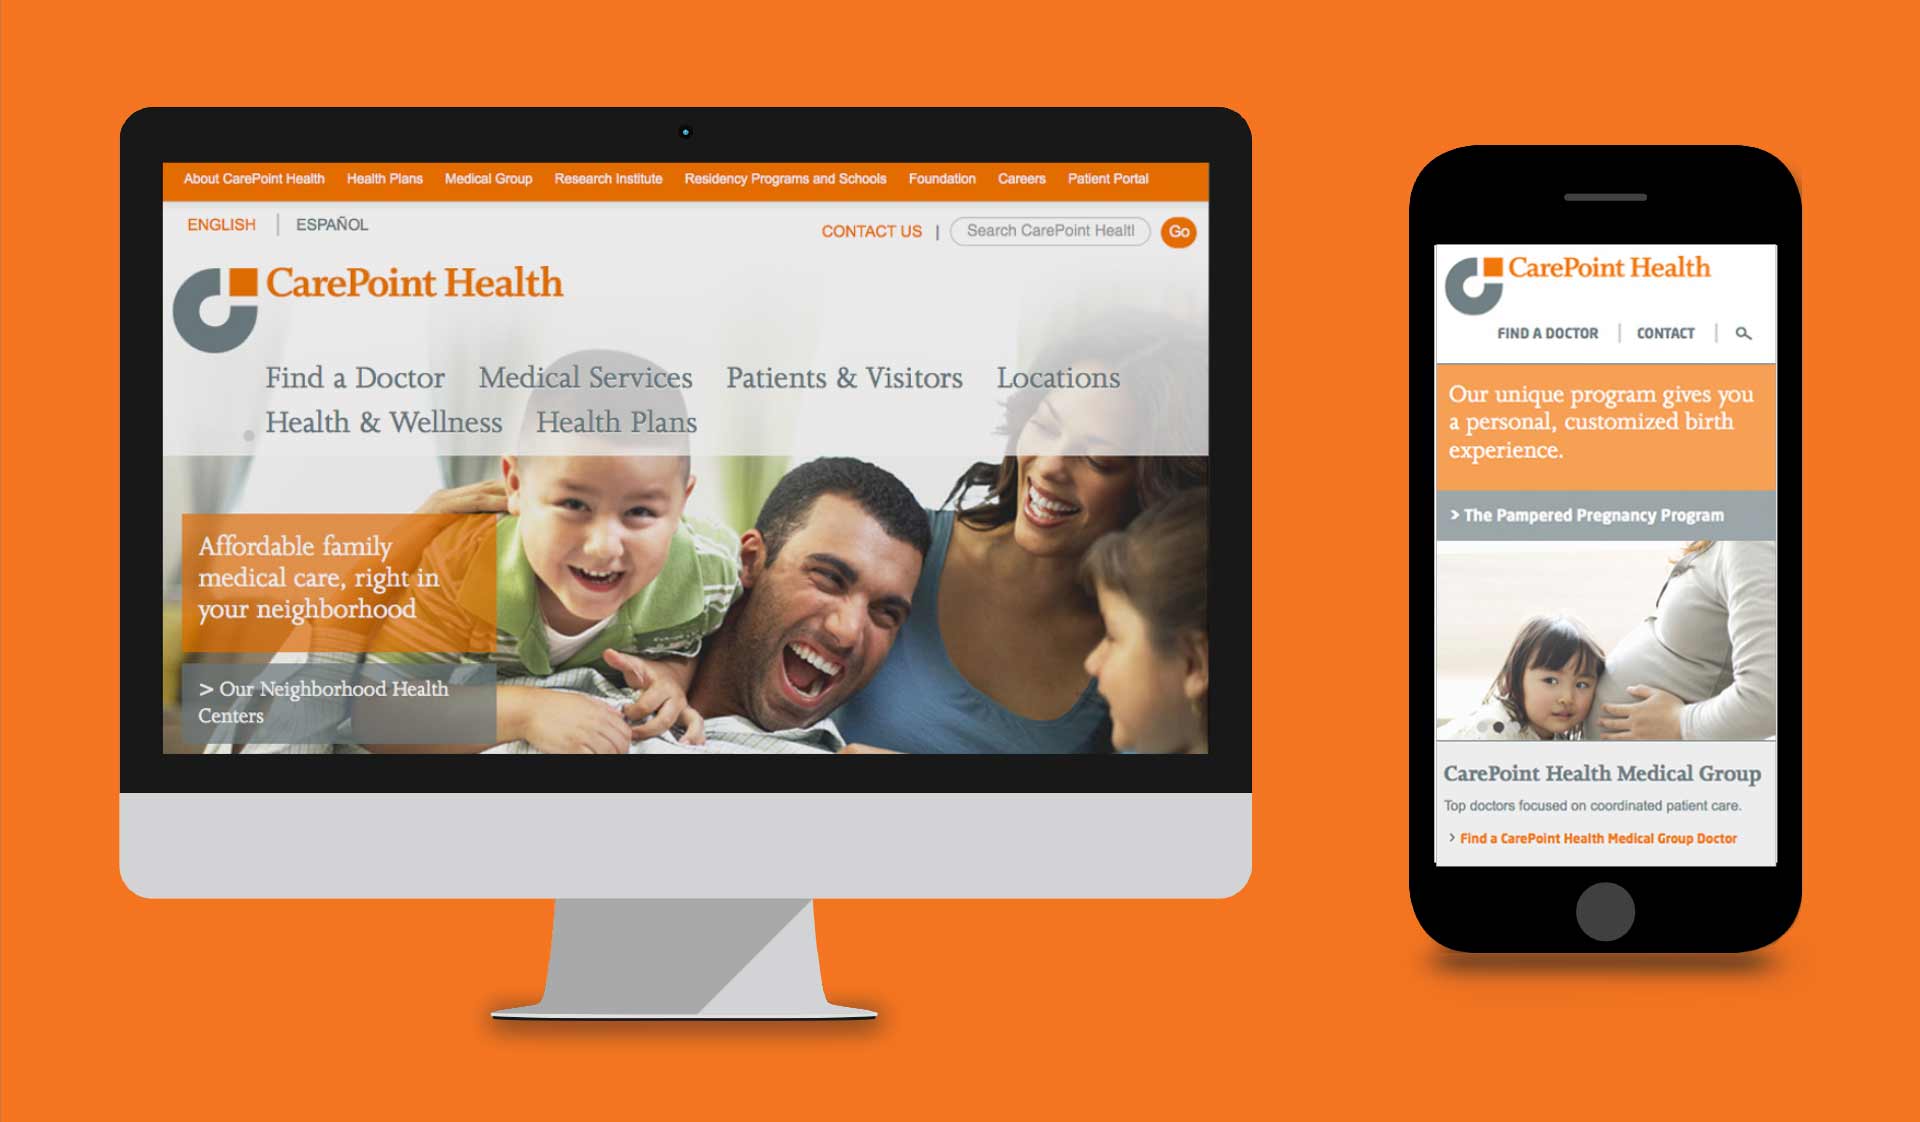 carepoint health on desktop and mobile device